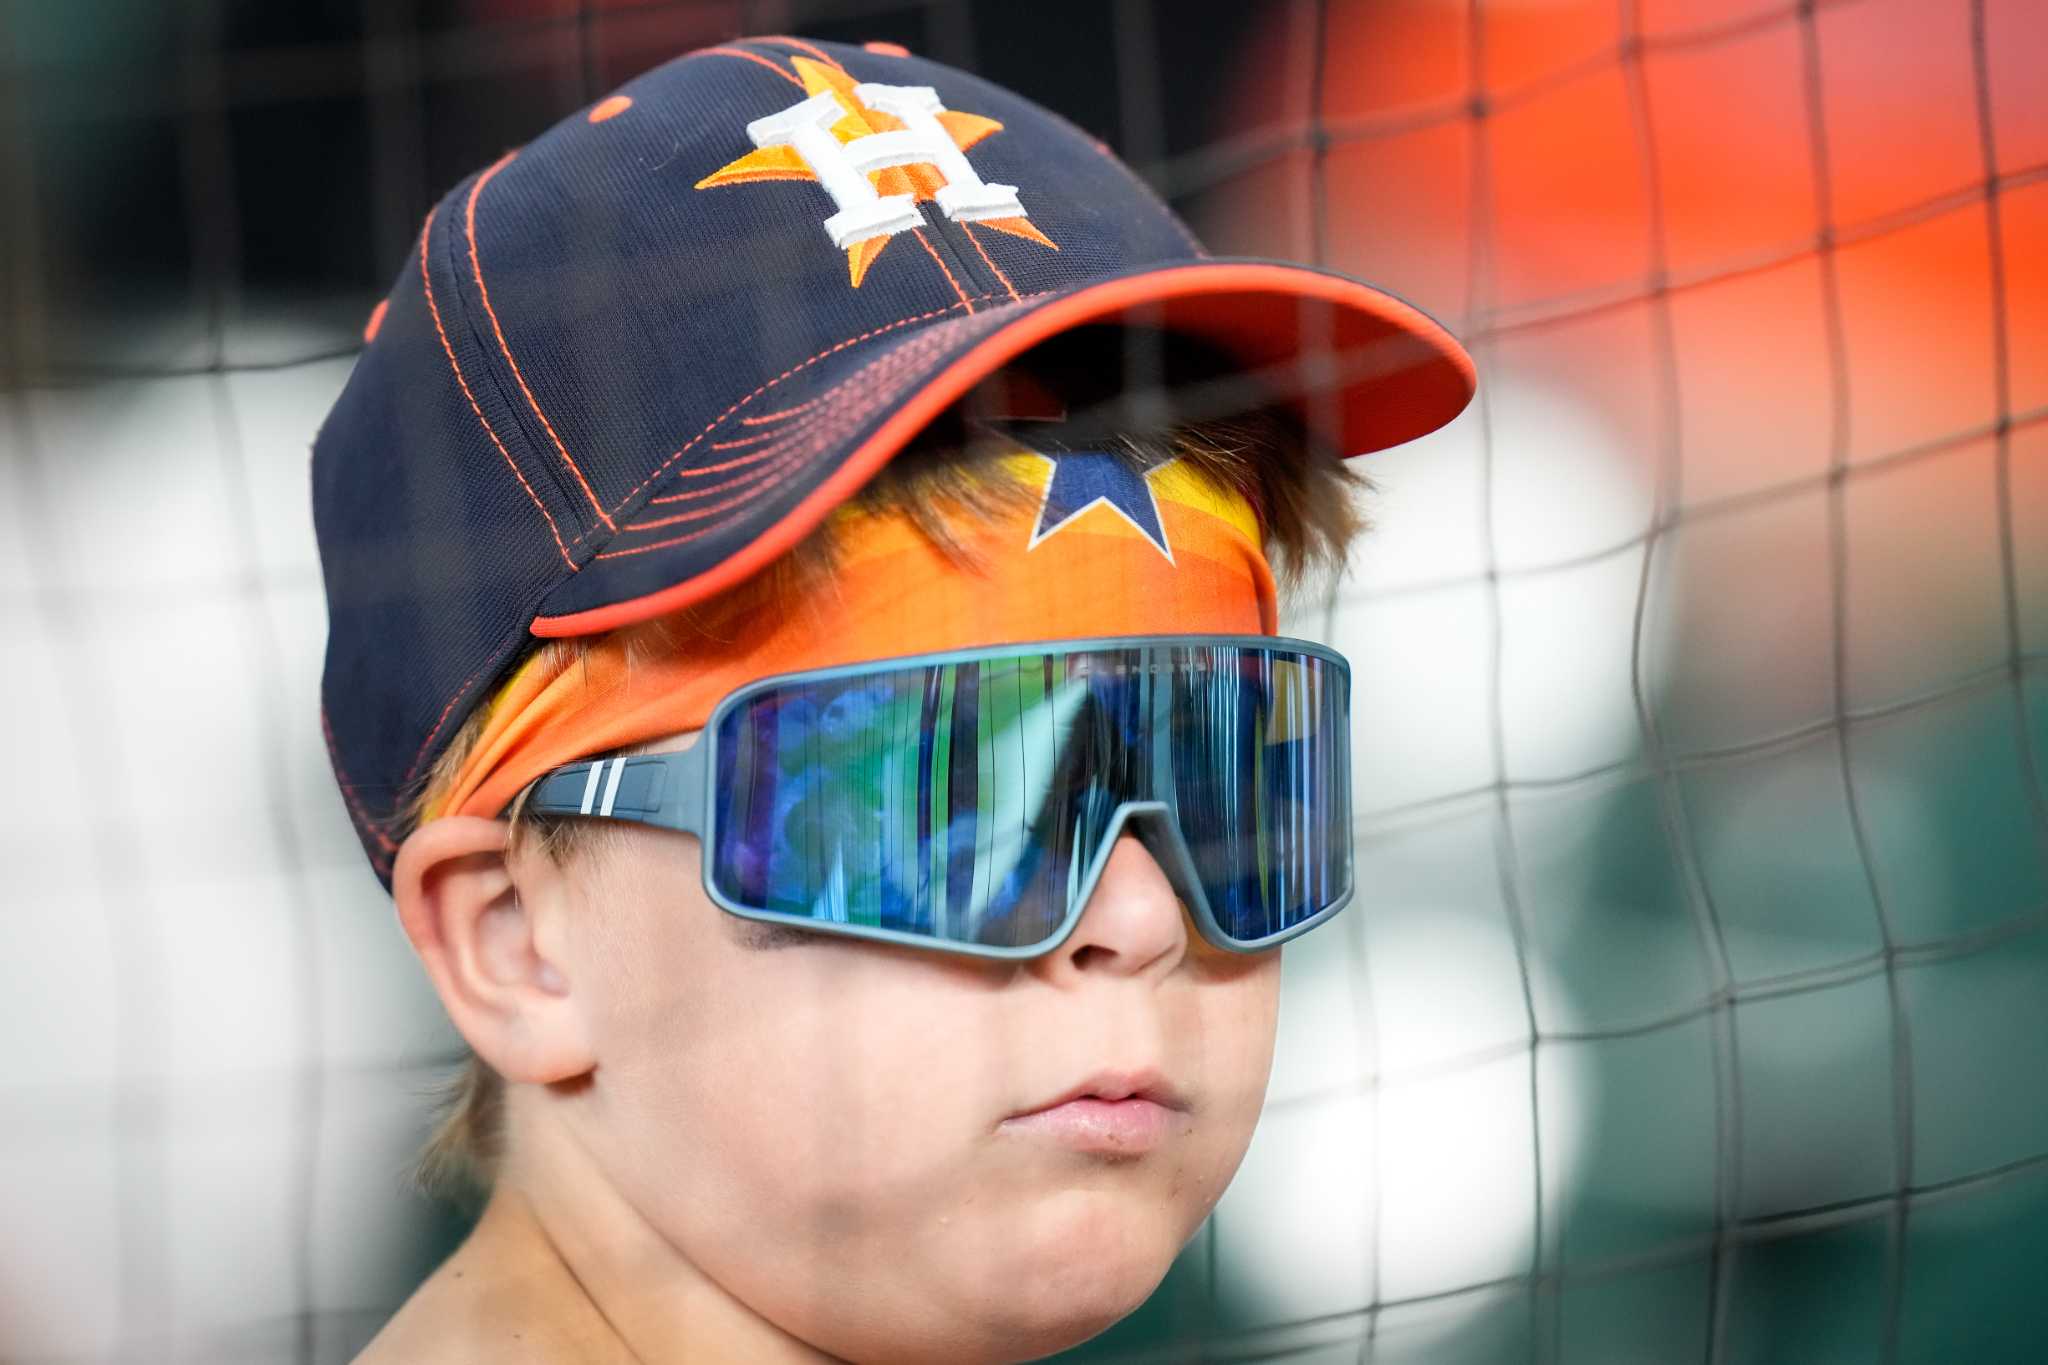 Young fans admit Astros success leaves them with little sense of loss